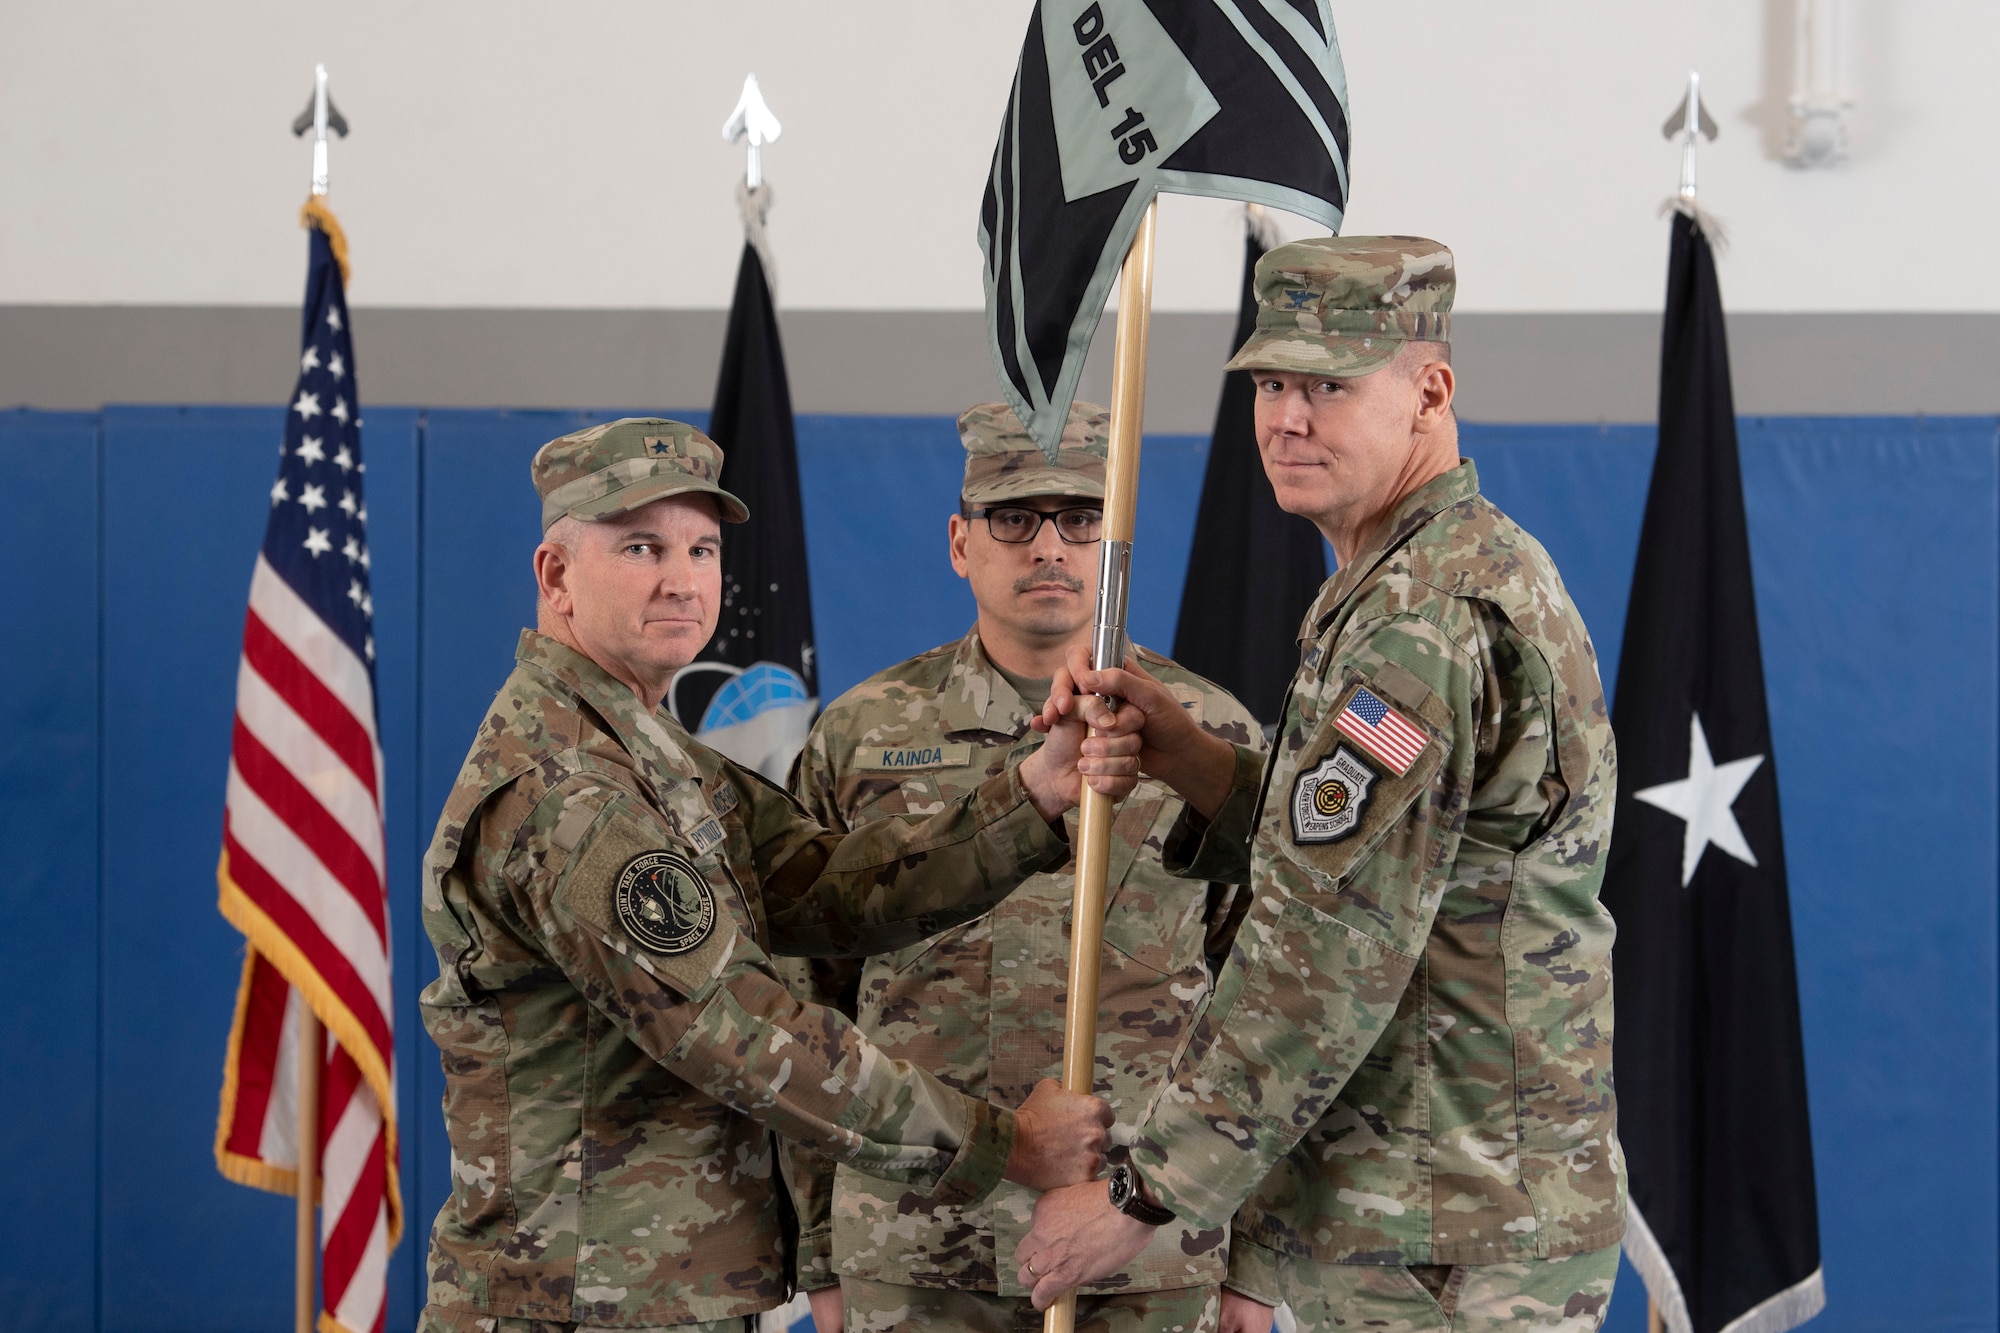 From left, U.S. Space Force Brig. Gen. Dennis Bythewood, Joint Task Force-Space Defense commander, U.S. Space Force Senior Master Sgt. Kristopher-Michael K. Kainoa, Space Delta 15 senior enlisted leader, and U.S. Space Force Col. Stephen Lyon, Space Delta 15 commander, participate in the passing of the guidon during the DEL 15 activation ceremony at Schriever Space Force Base, Colorado, March 10, 2023. The mission of DEL 15 is to provide service command-and-control (C2) capability, mission ready crew forces, skills training, certifications, intelligence, surveillance, and reconnaissance (ISR), and support and cyber mission defense, and special mission support to the JTF-SD and its National Space Defense Center. (U.S. Space Force photo by Dennis Rogers)